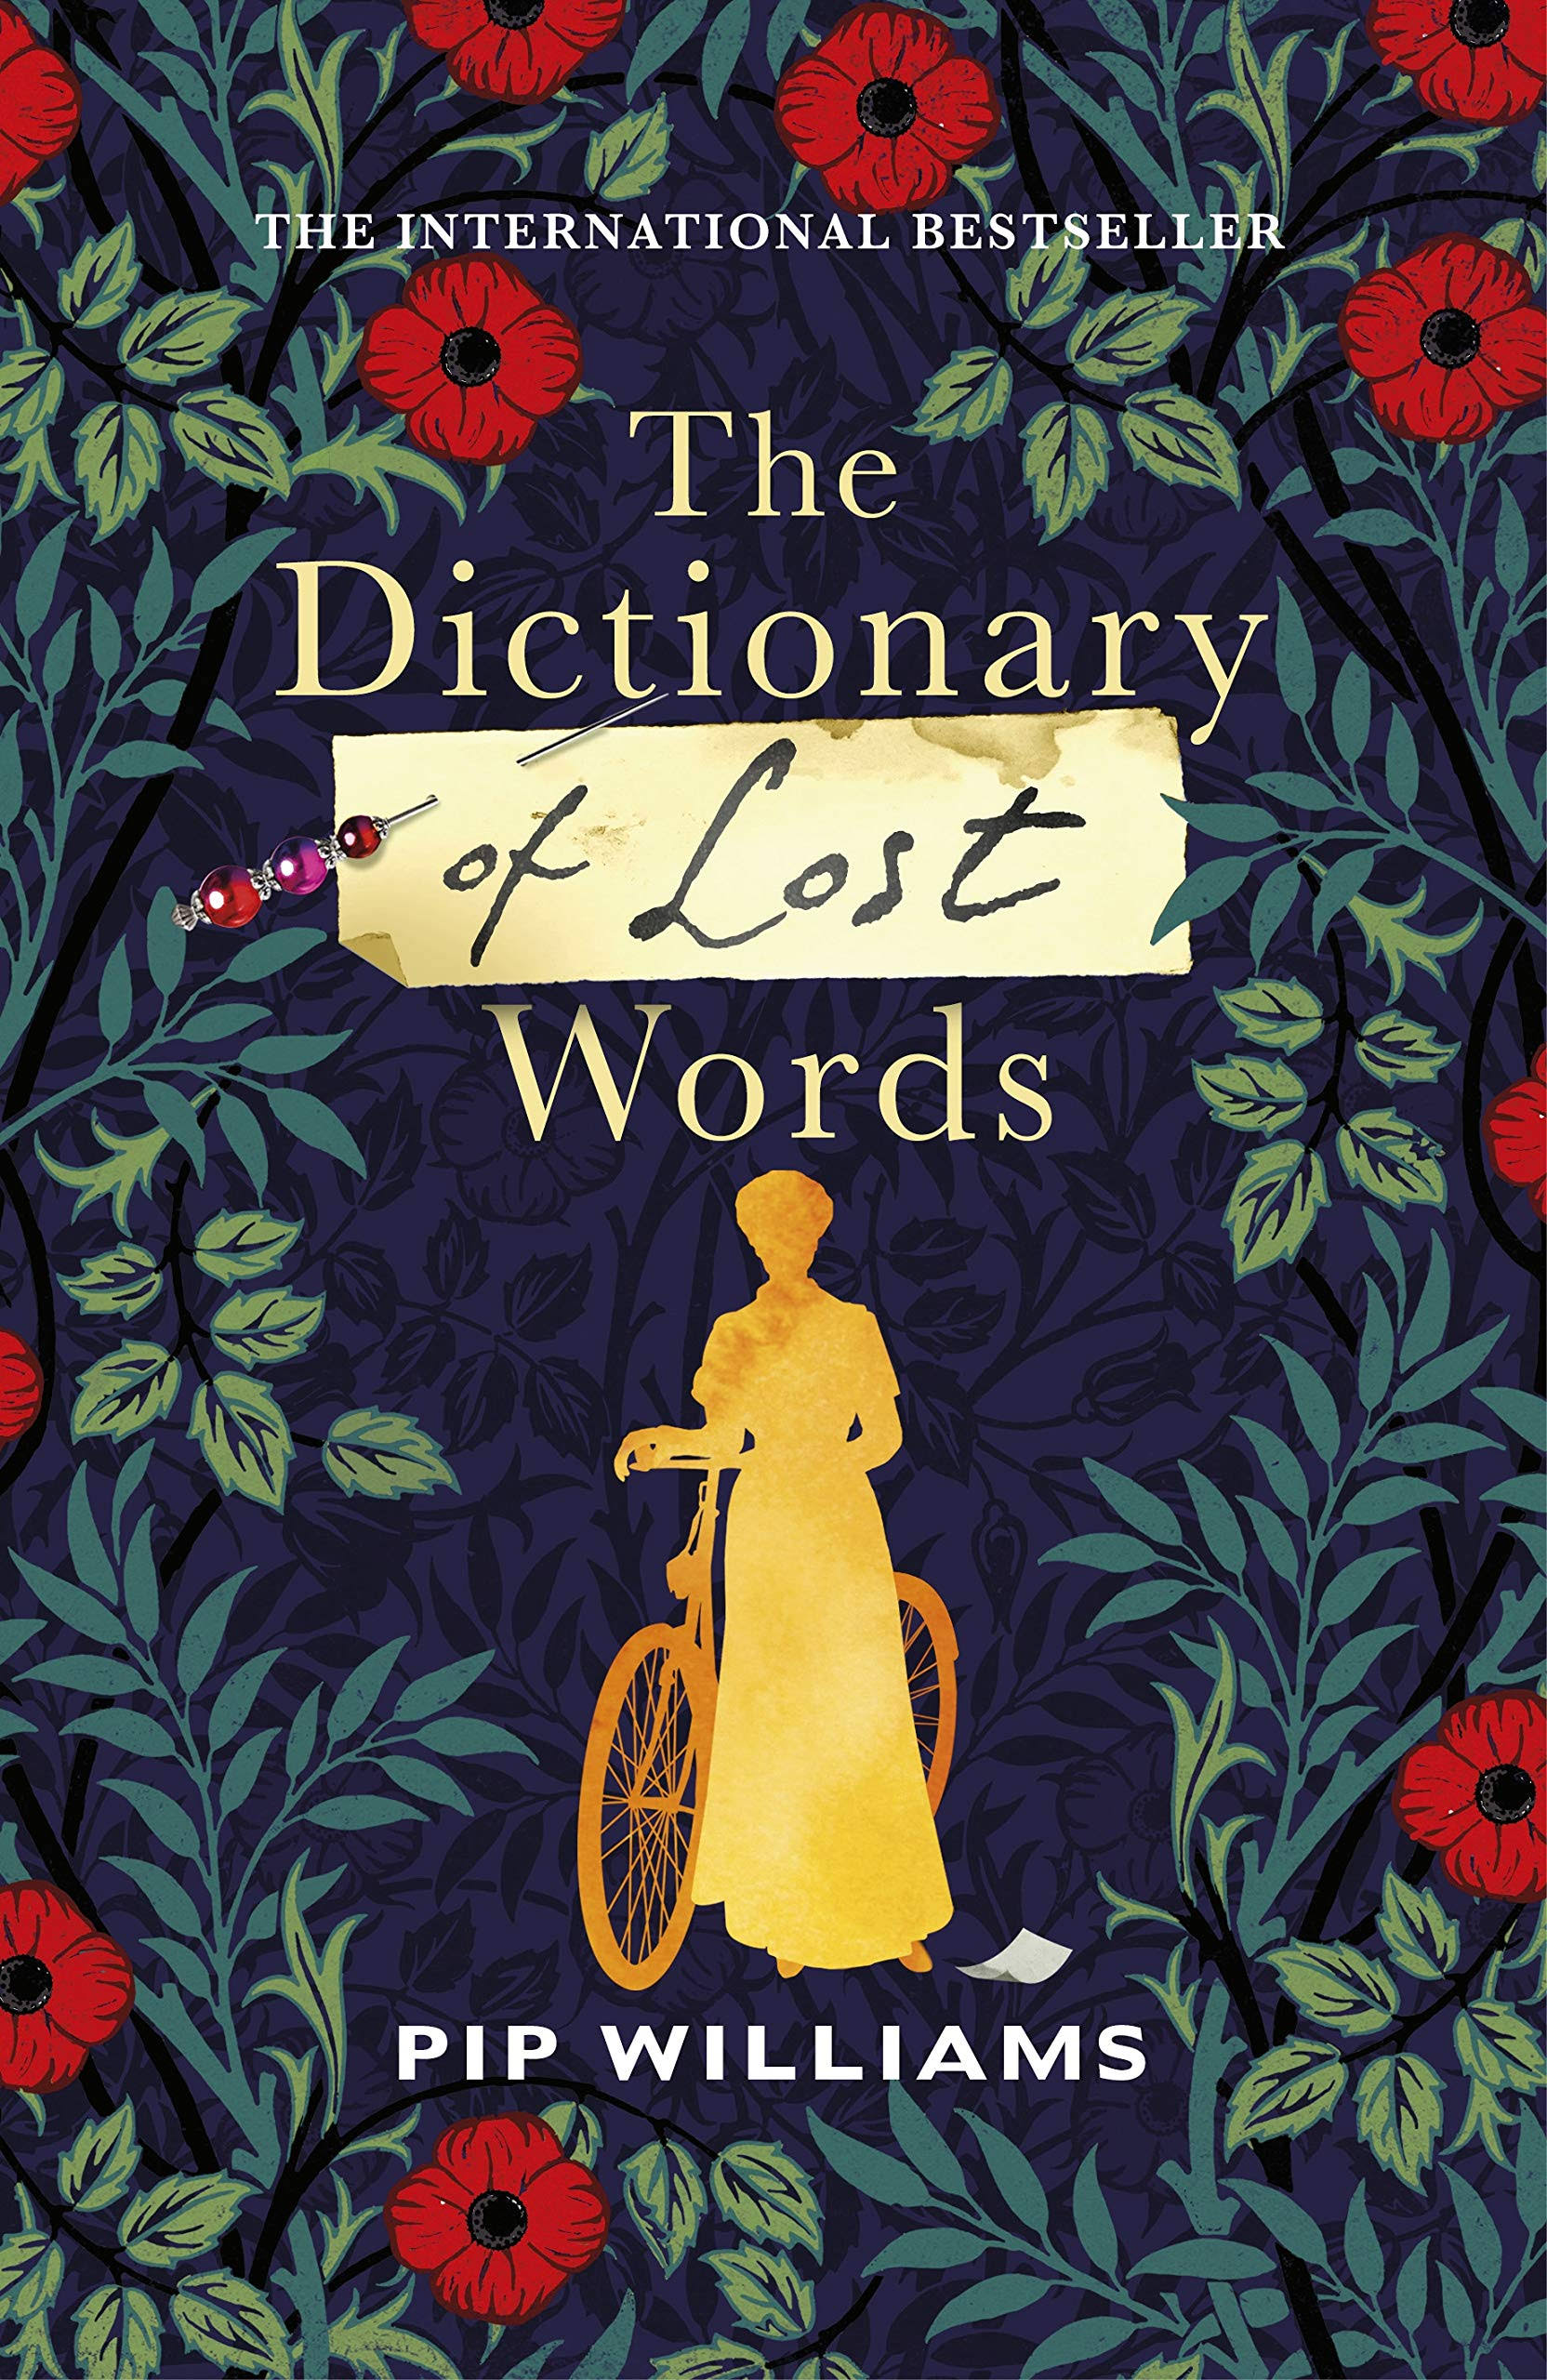 The Dictionary of Lost Words [Book]